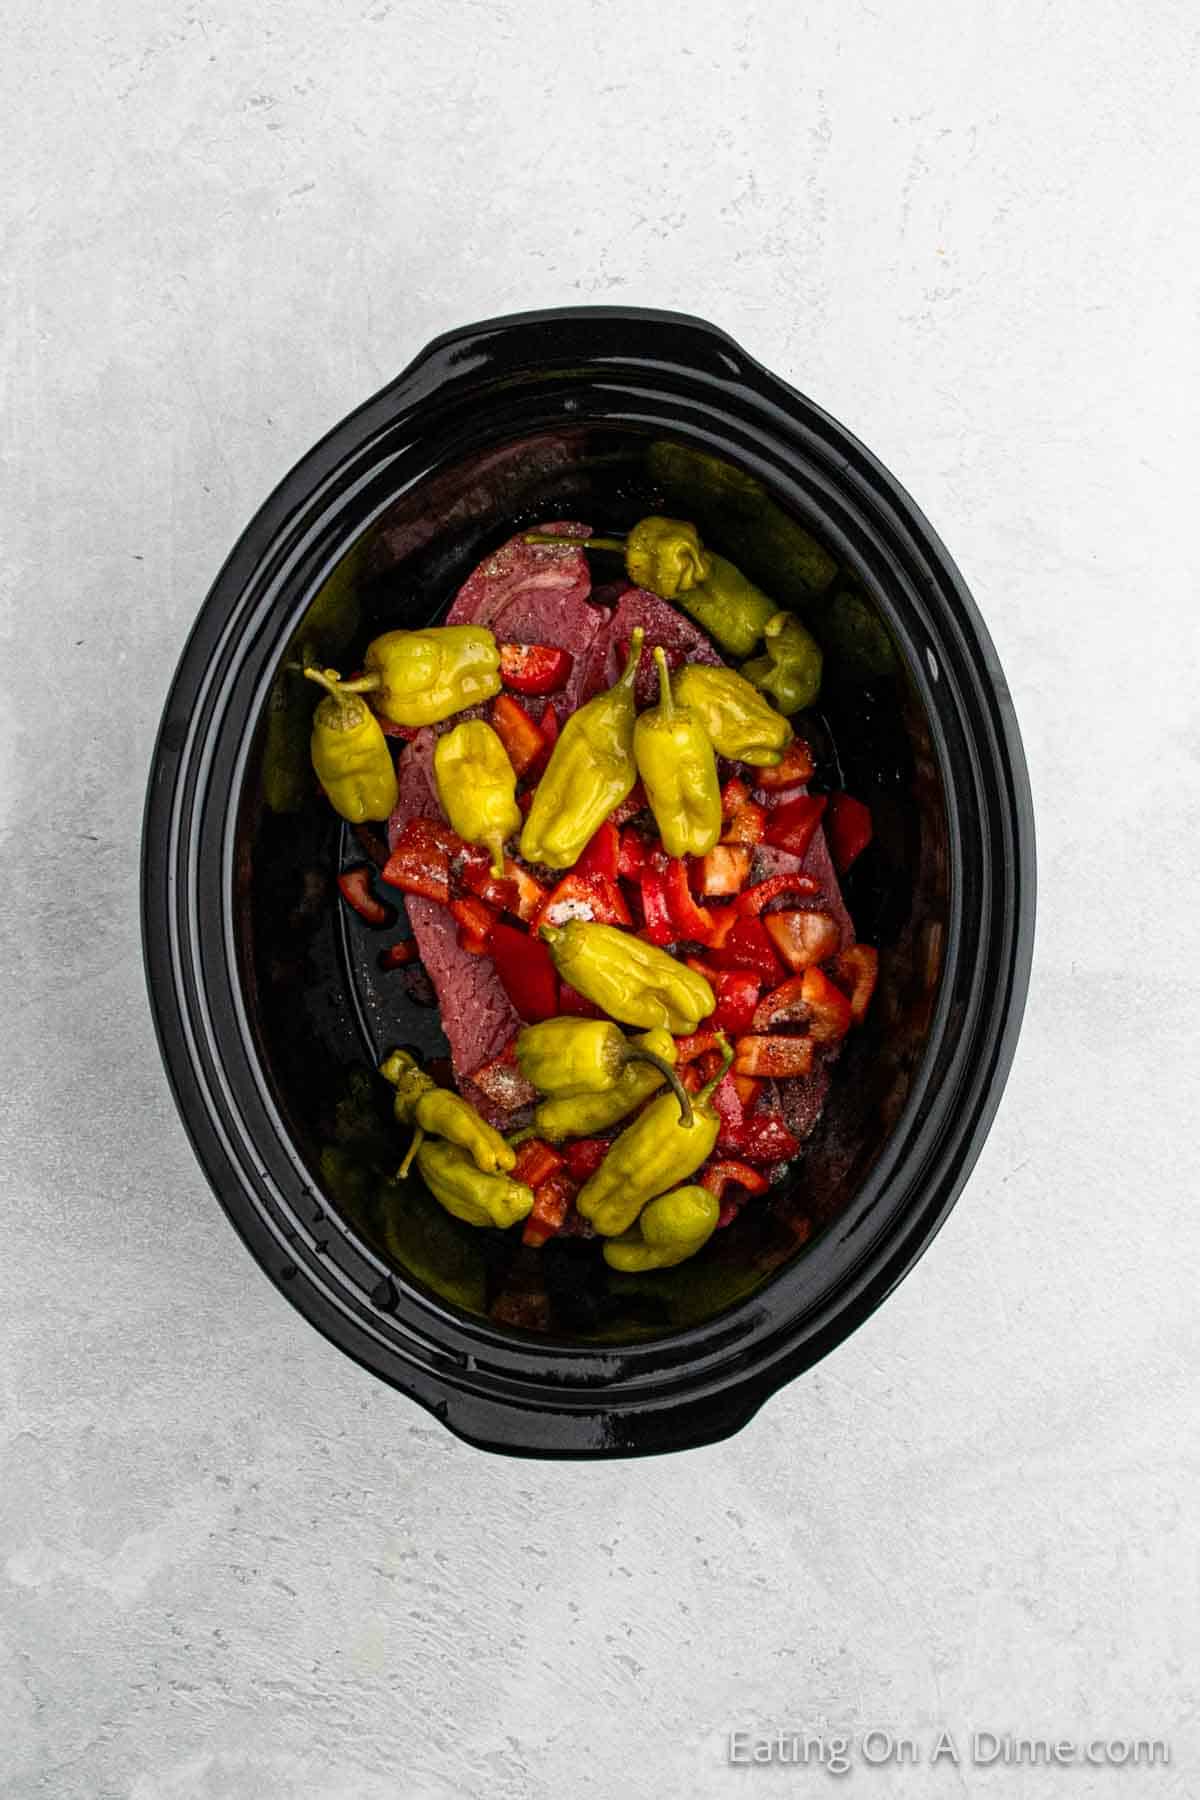 Top the roast with pepperoncini peppers